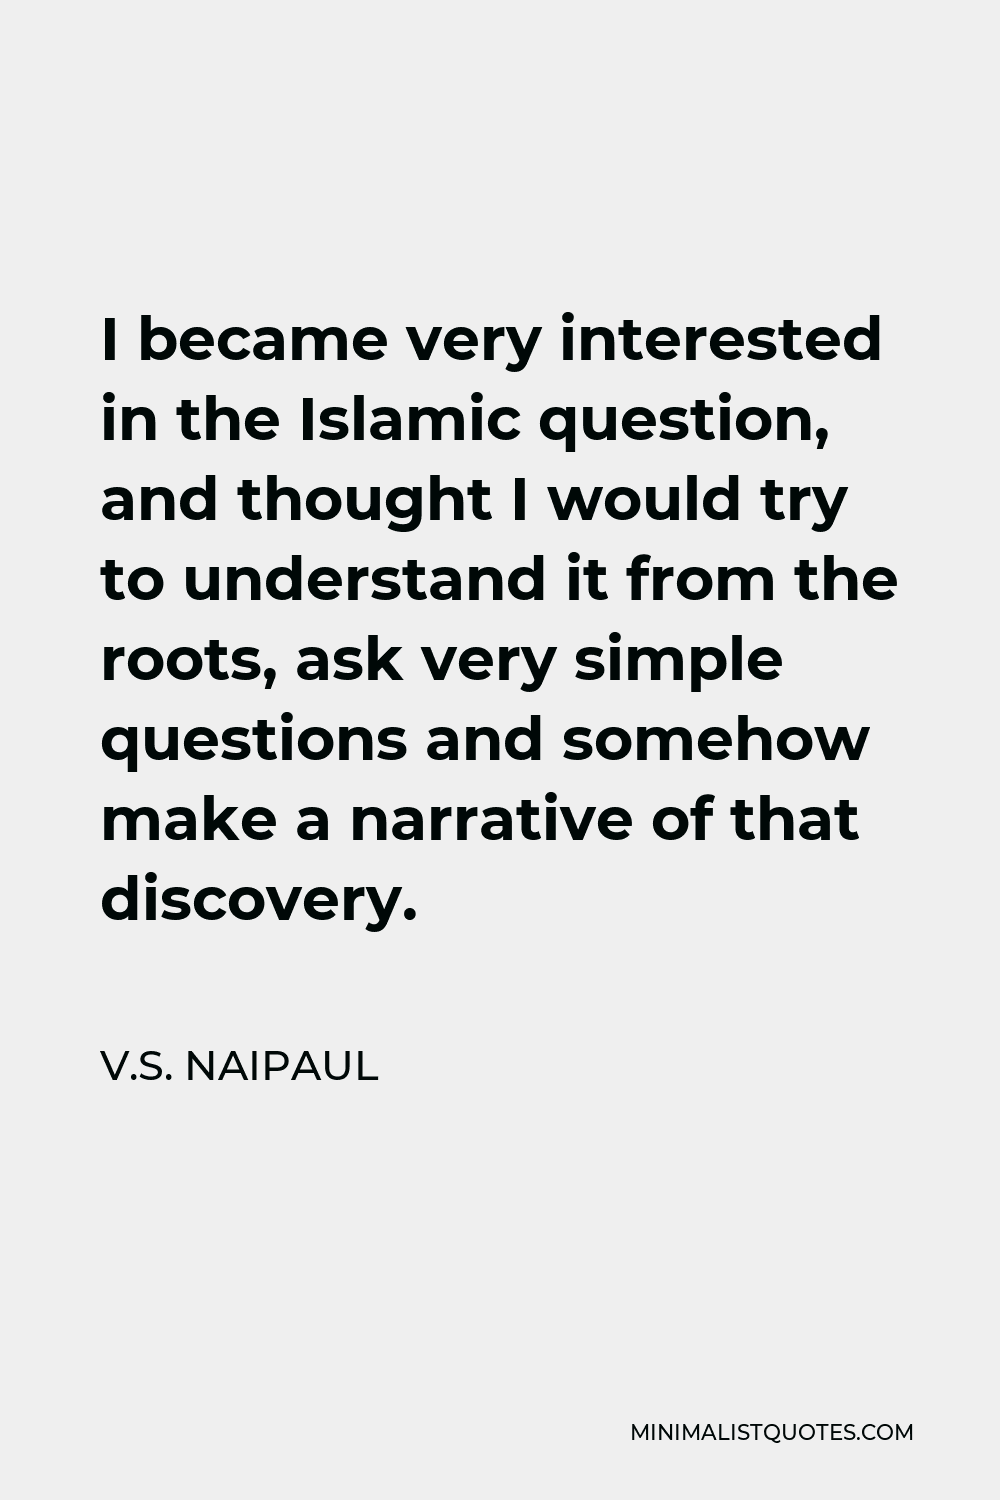 V.S. Naipaul Quote - I became very interested in the Islamic question, and thought I would try to understand it from the roots, ask very simple questions and somehow make a narrative of that discovery.